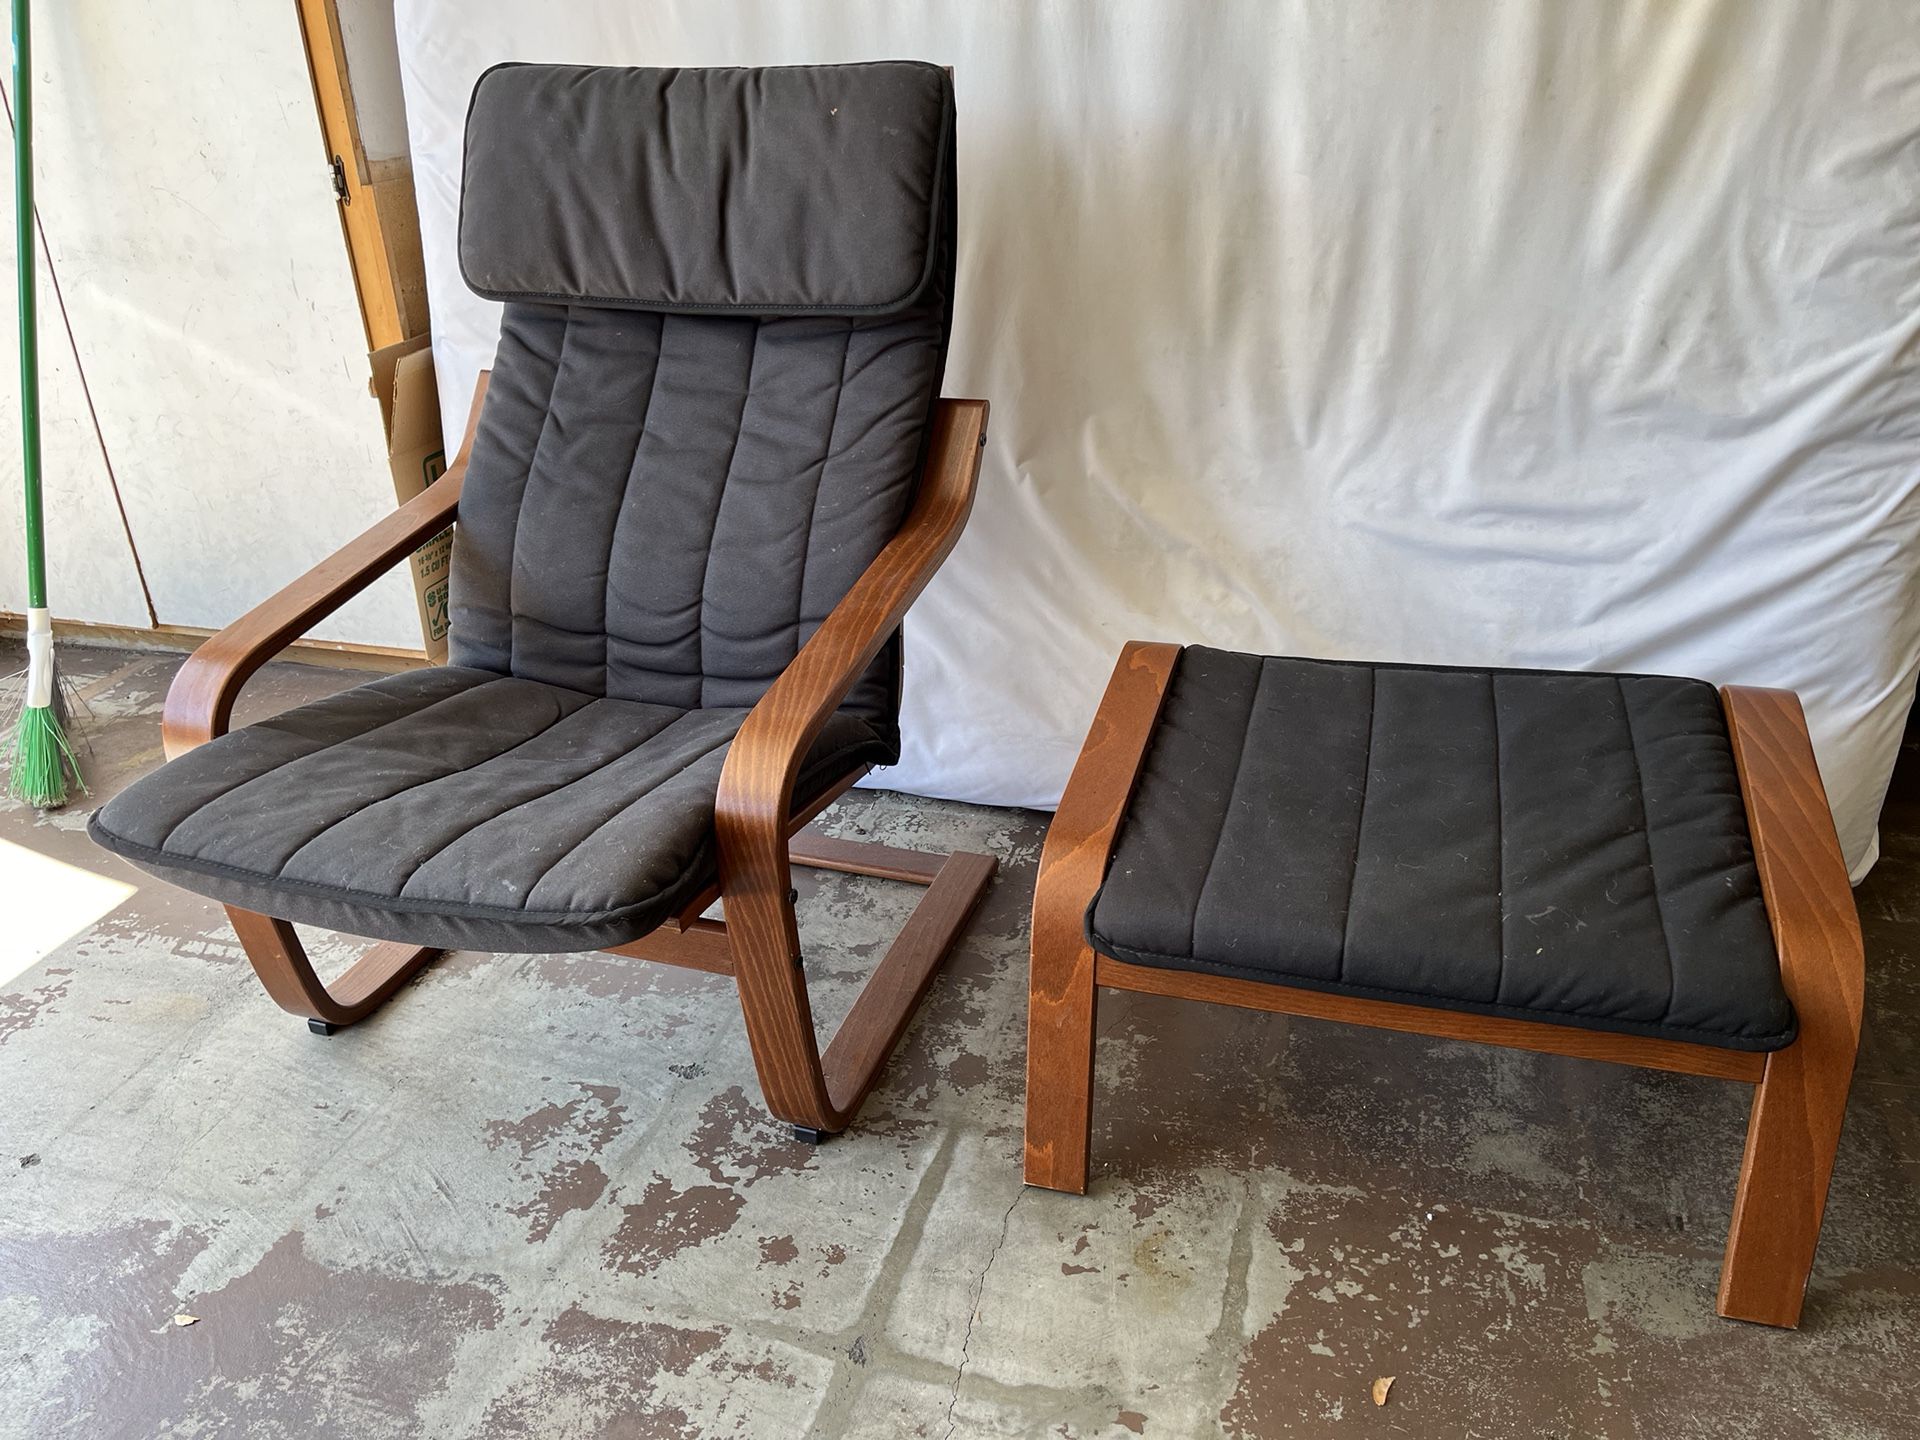 IKEA Poang Chair And Footrest